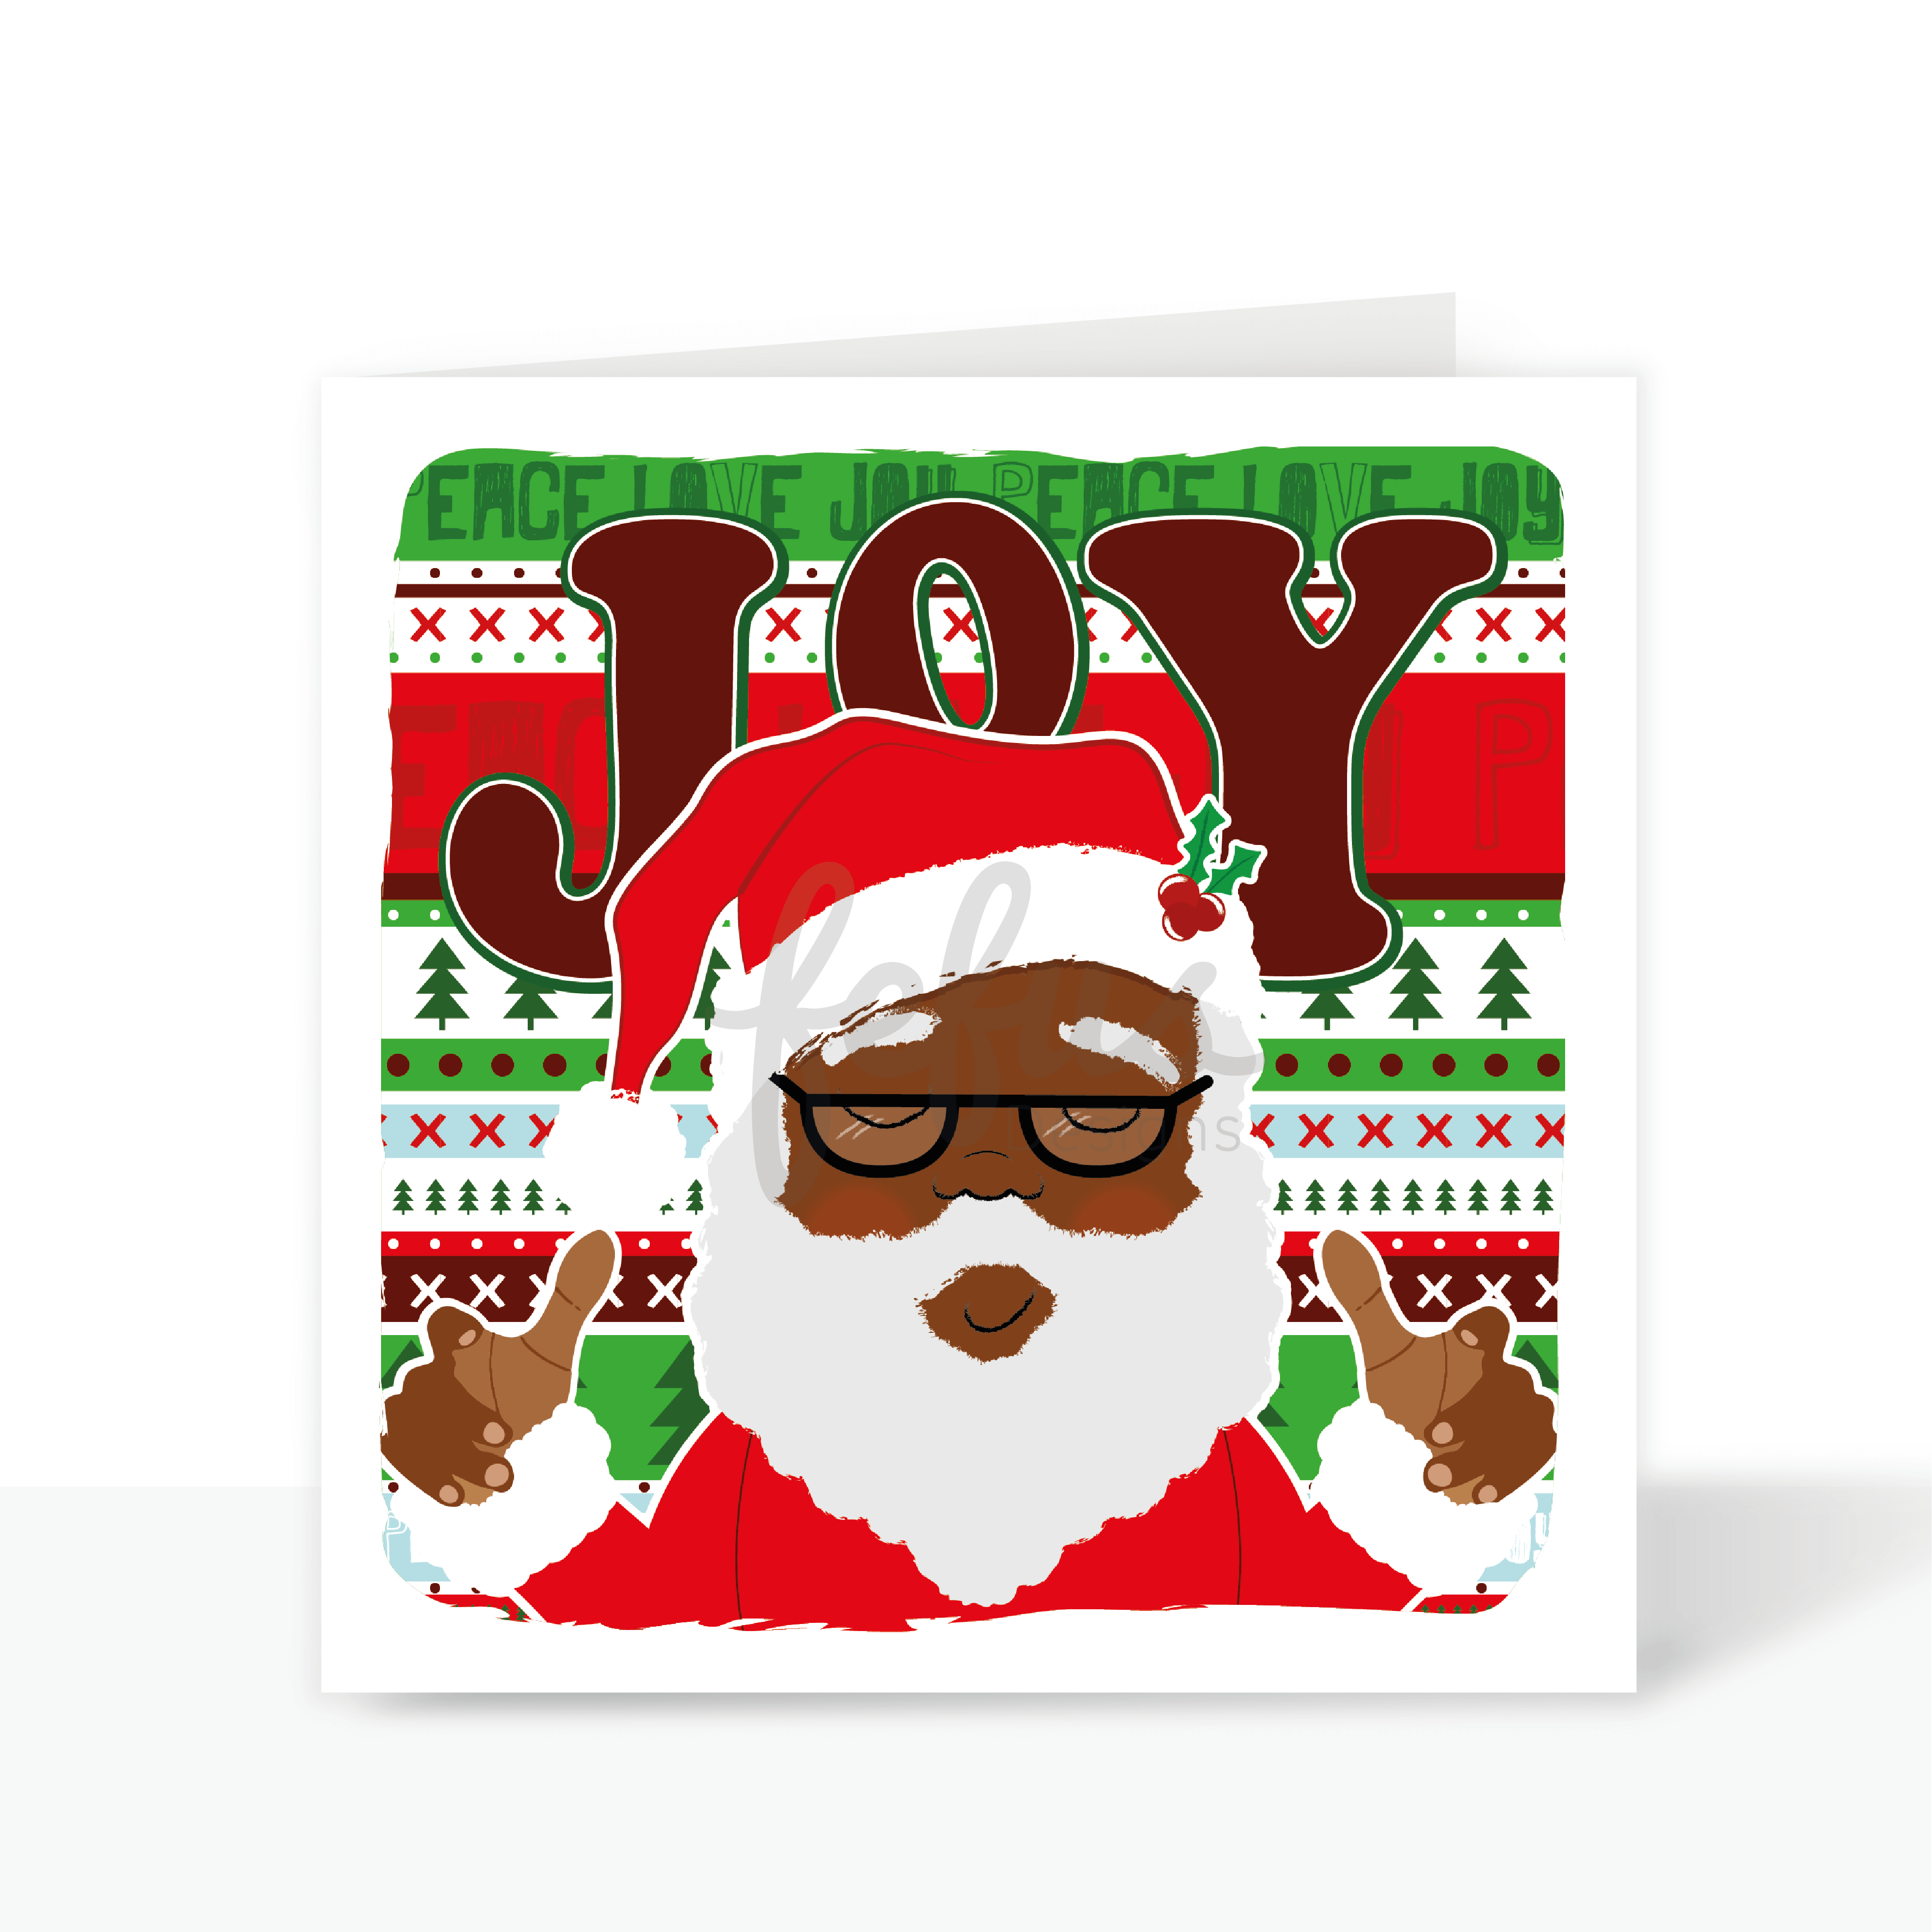 A Christmas card featuring a Black Santa character dressed as Santa Claus holding his hands up. (75 characters)